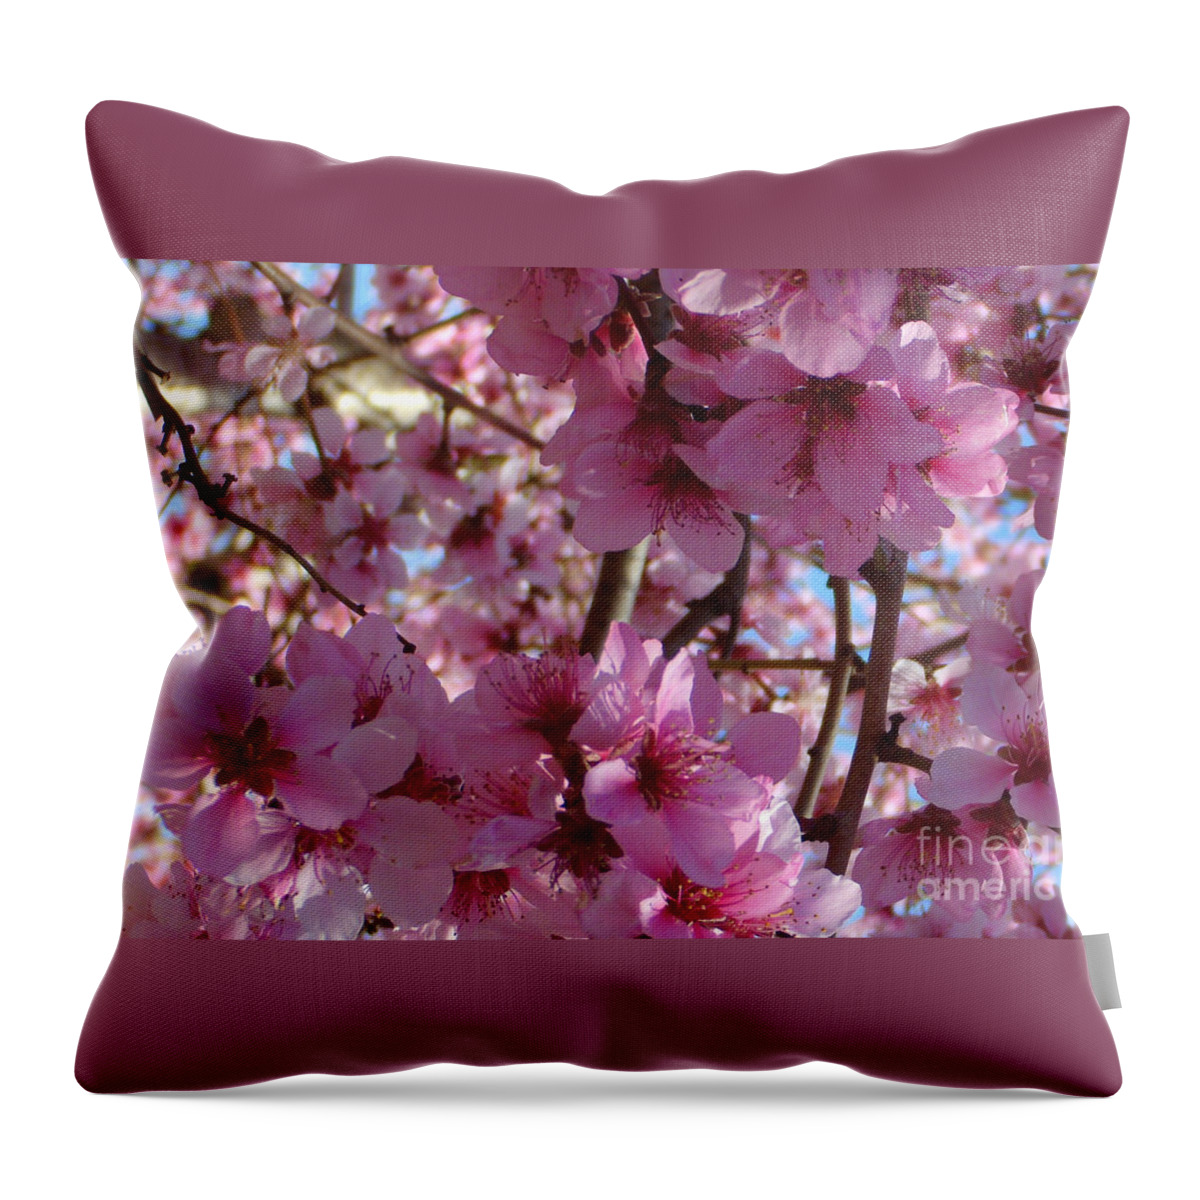 Blossoms Throw Pillow featuring the photograph Blossoms by Lydia Holly